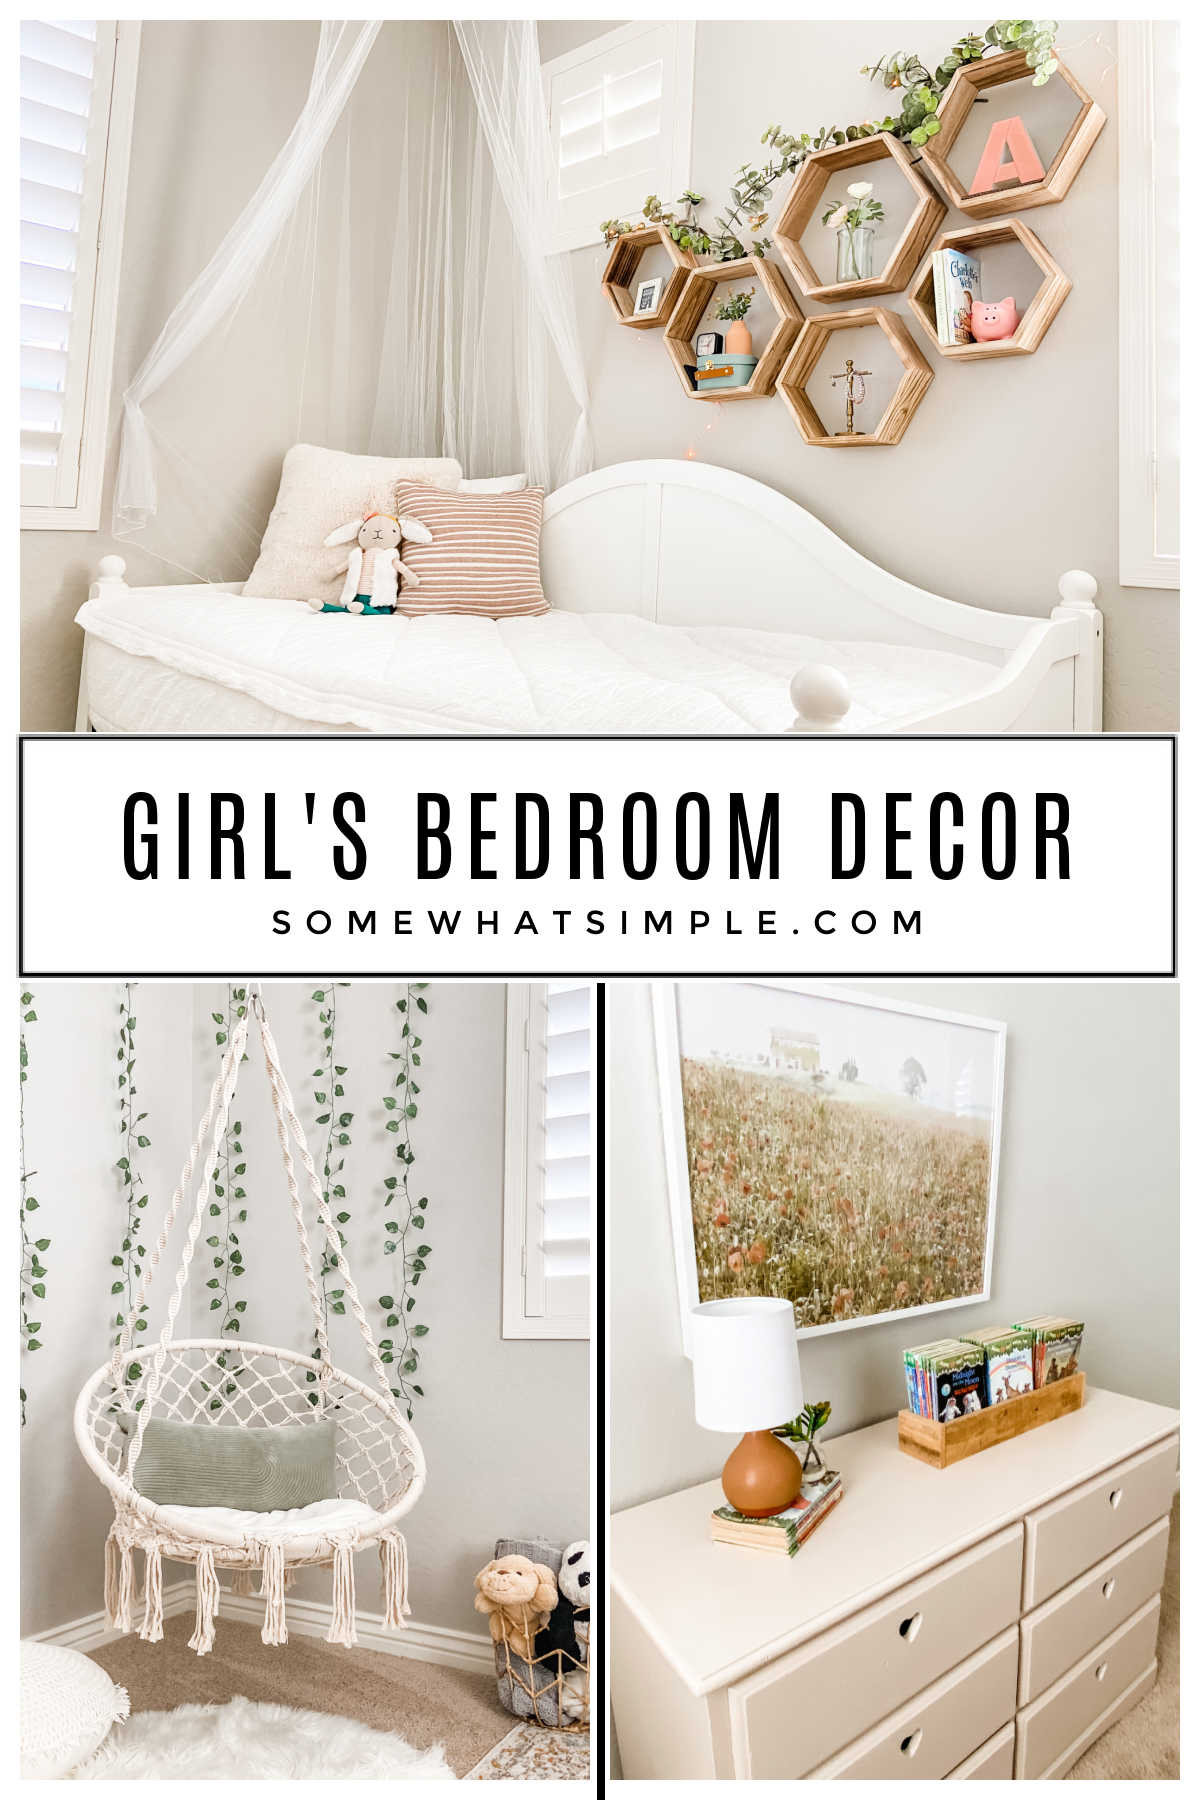 Easily decorate your daughter's bedroom, without spending a lot of money! Here's how we updated Addie's space with some simple, affordable girls bedroom decor. via @somewhatsimple